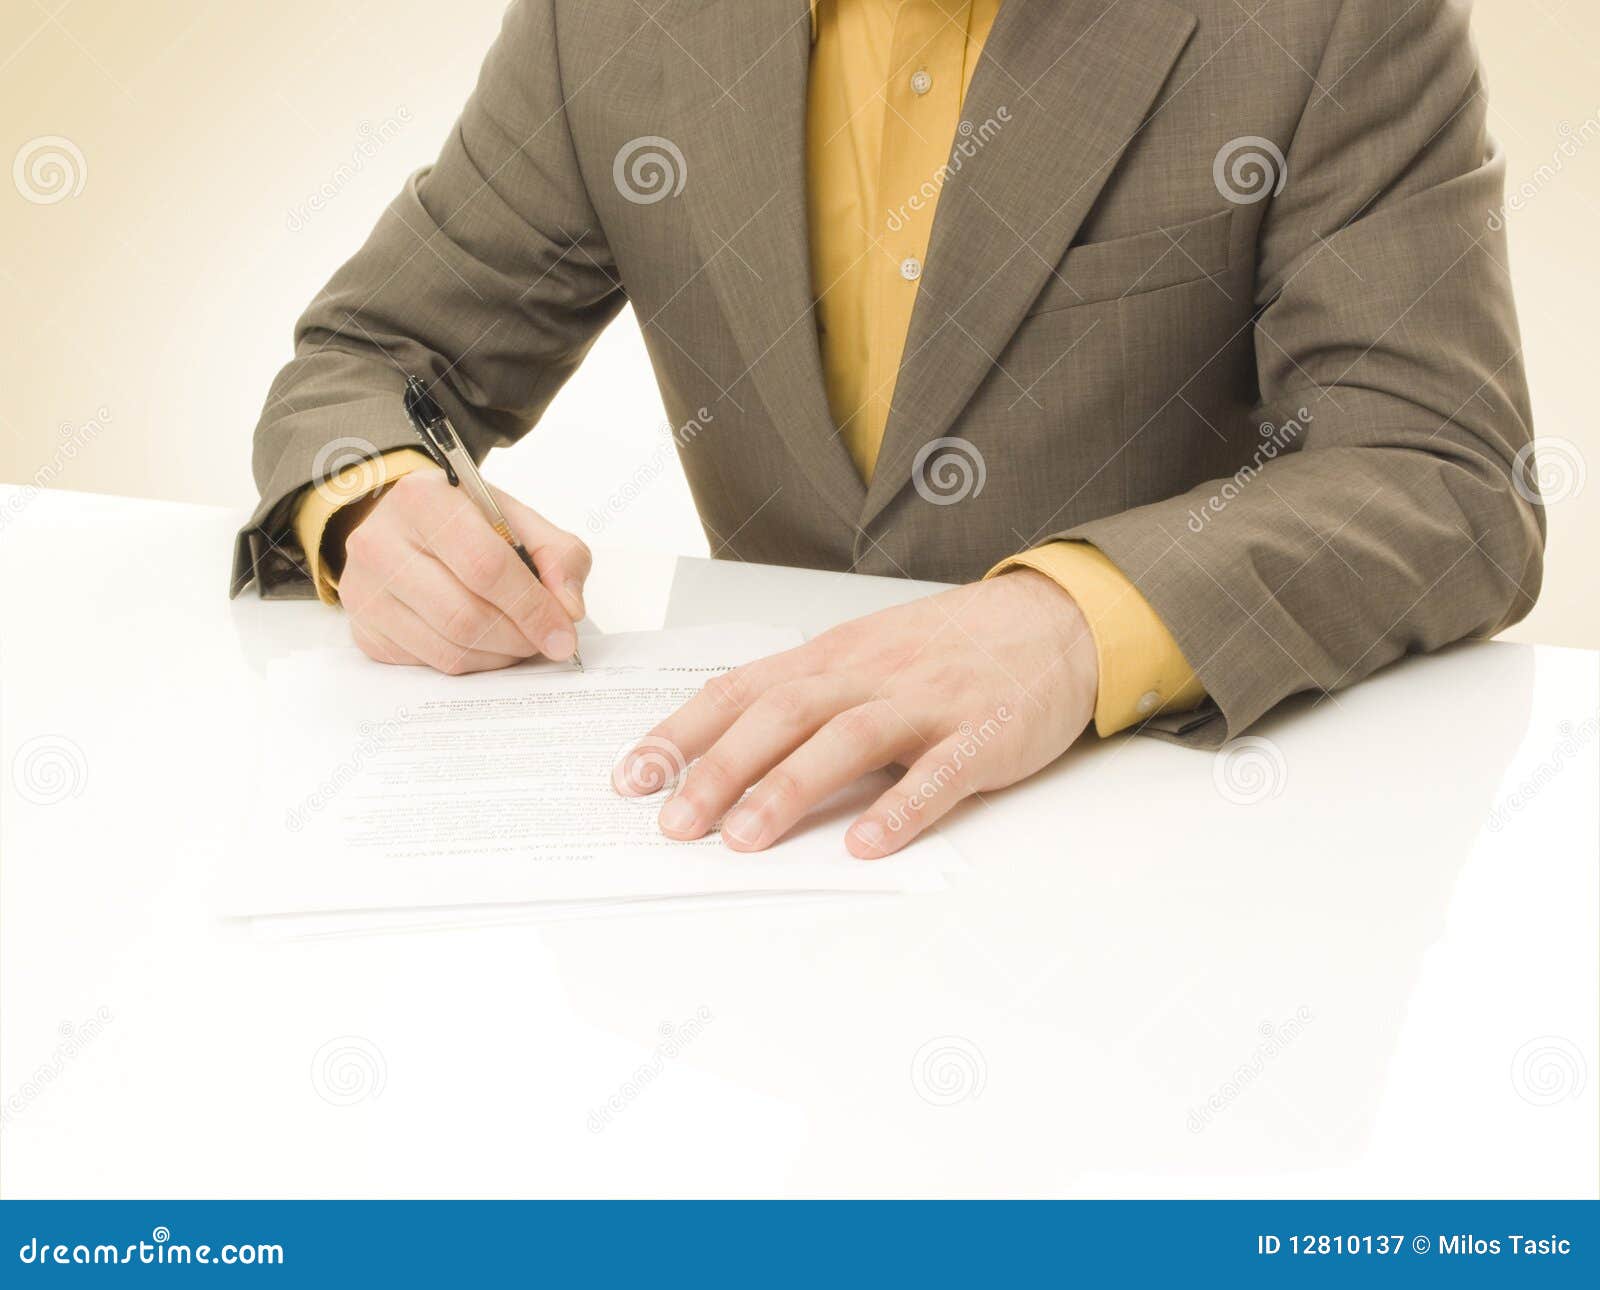 Businessman Signs a Contract Stock Image - Image of write, text: 12810137